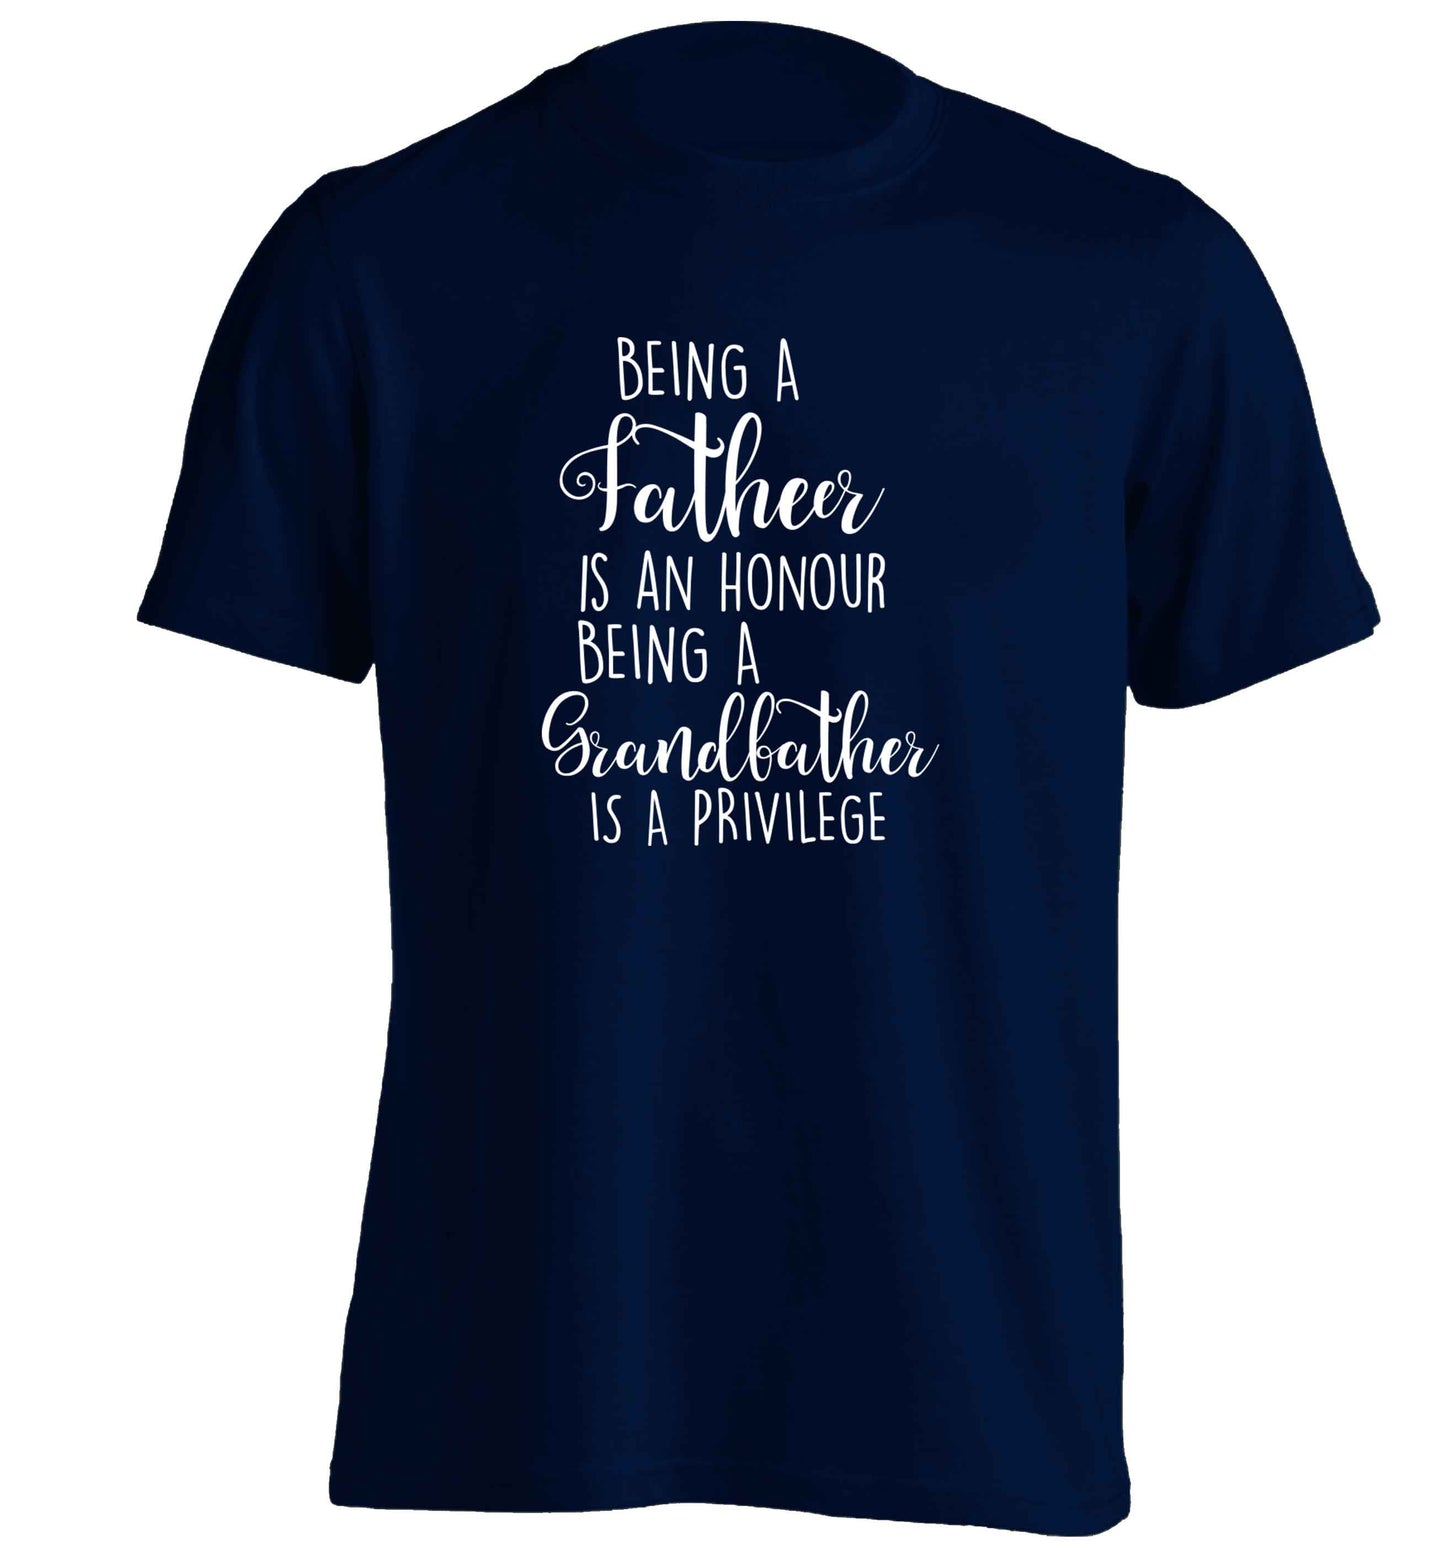 Being a father is an honour being a grandfather is a privilege adults unisex navy Tshirt 2XL